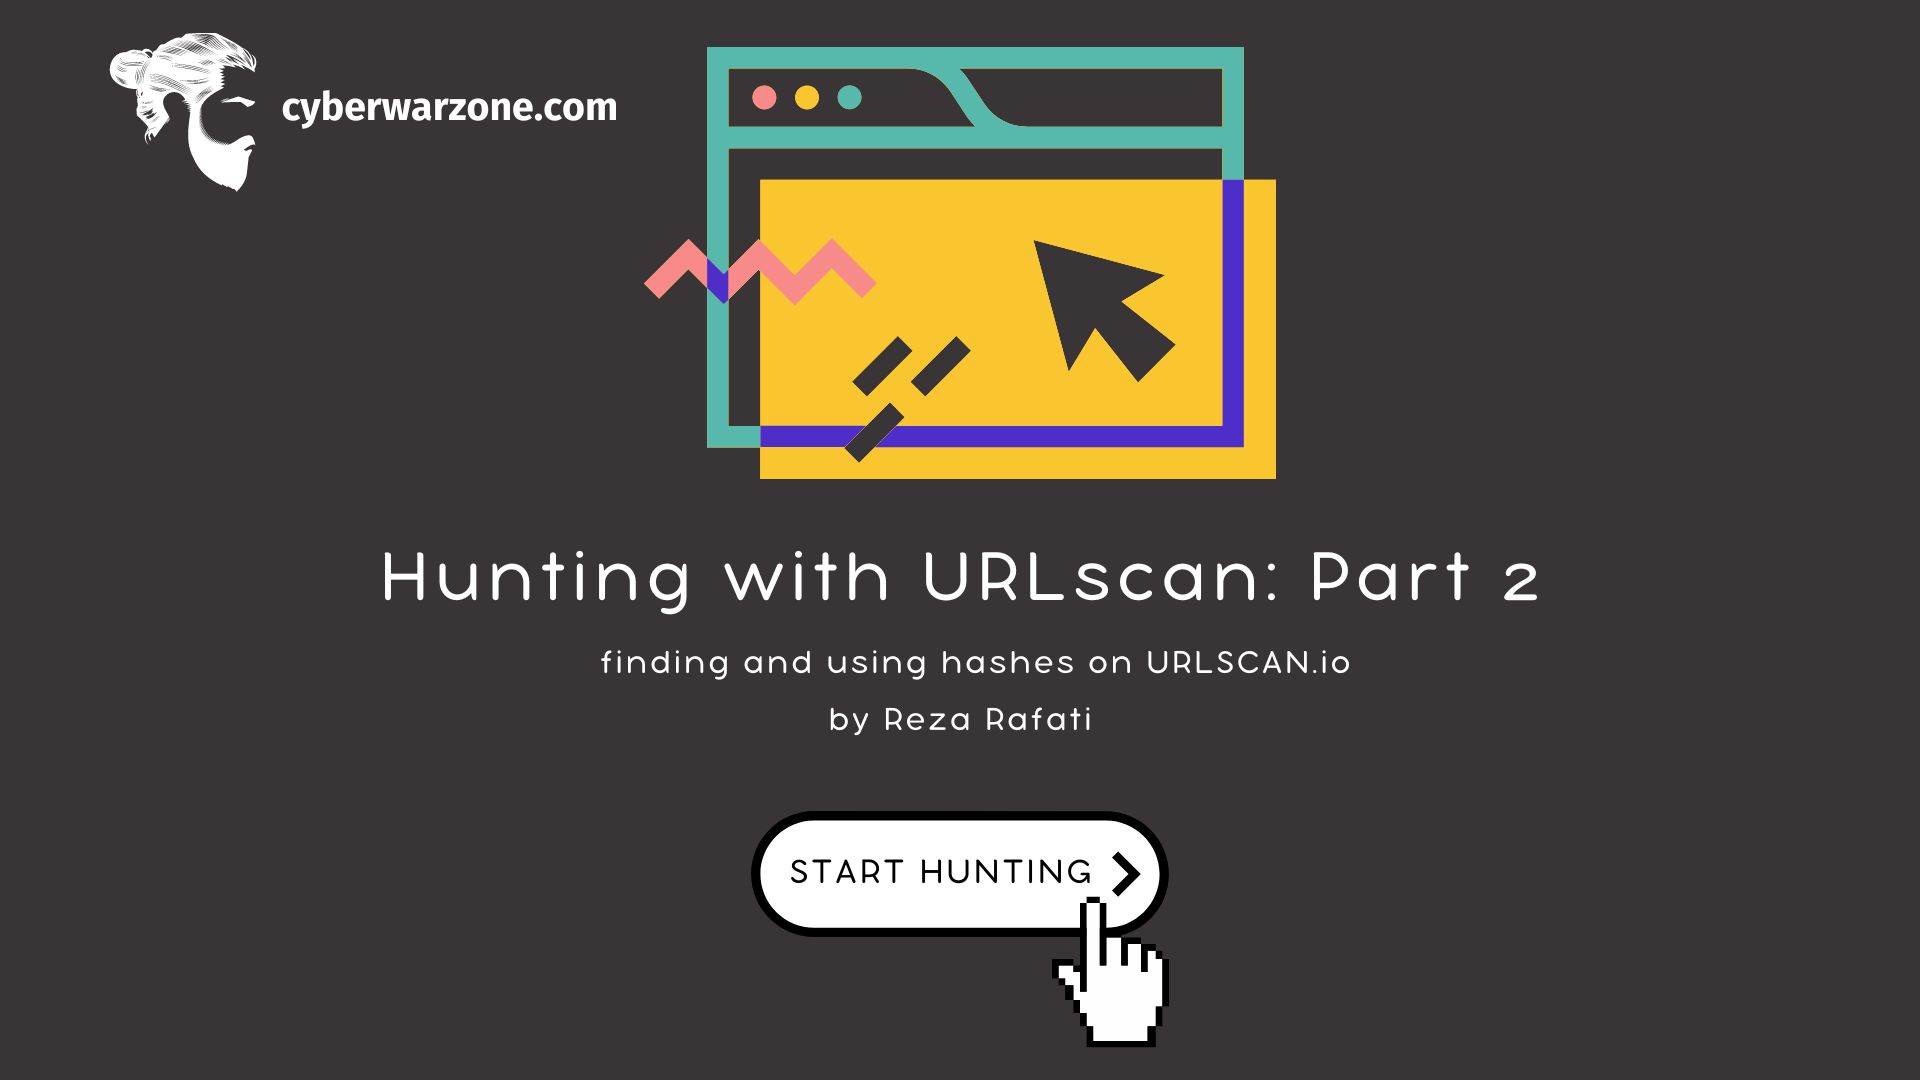 Hunting With URLscan: Part 2